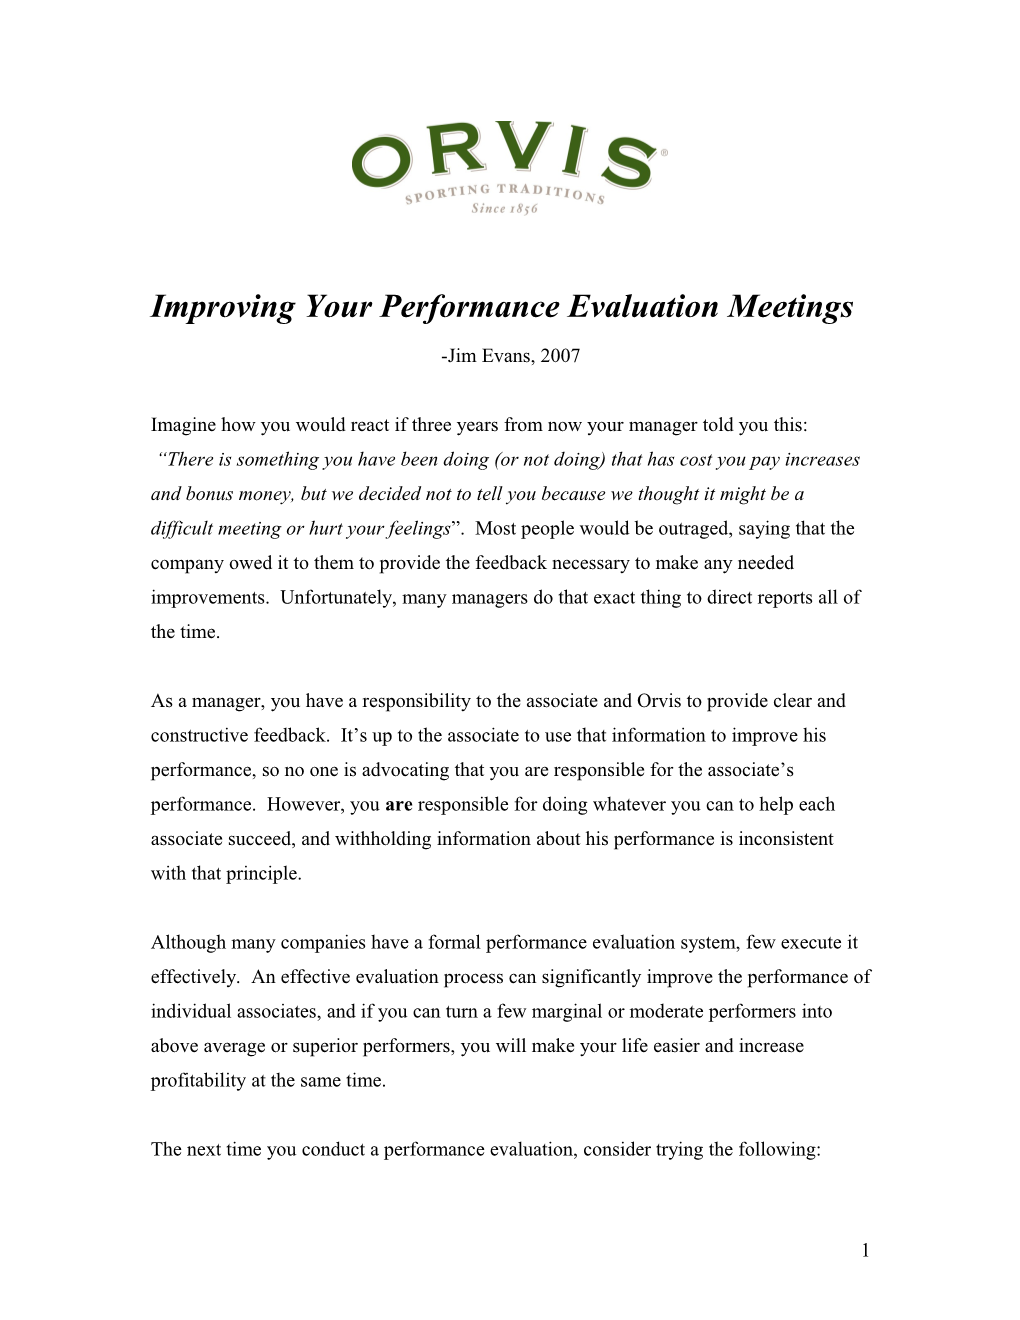 Improving Your Performance Evaluation Meetings